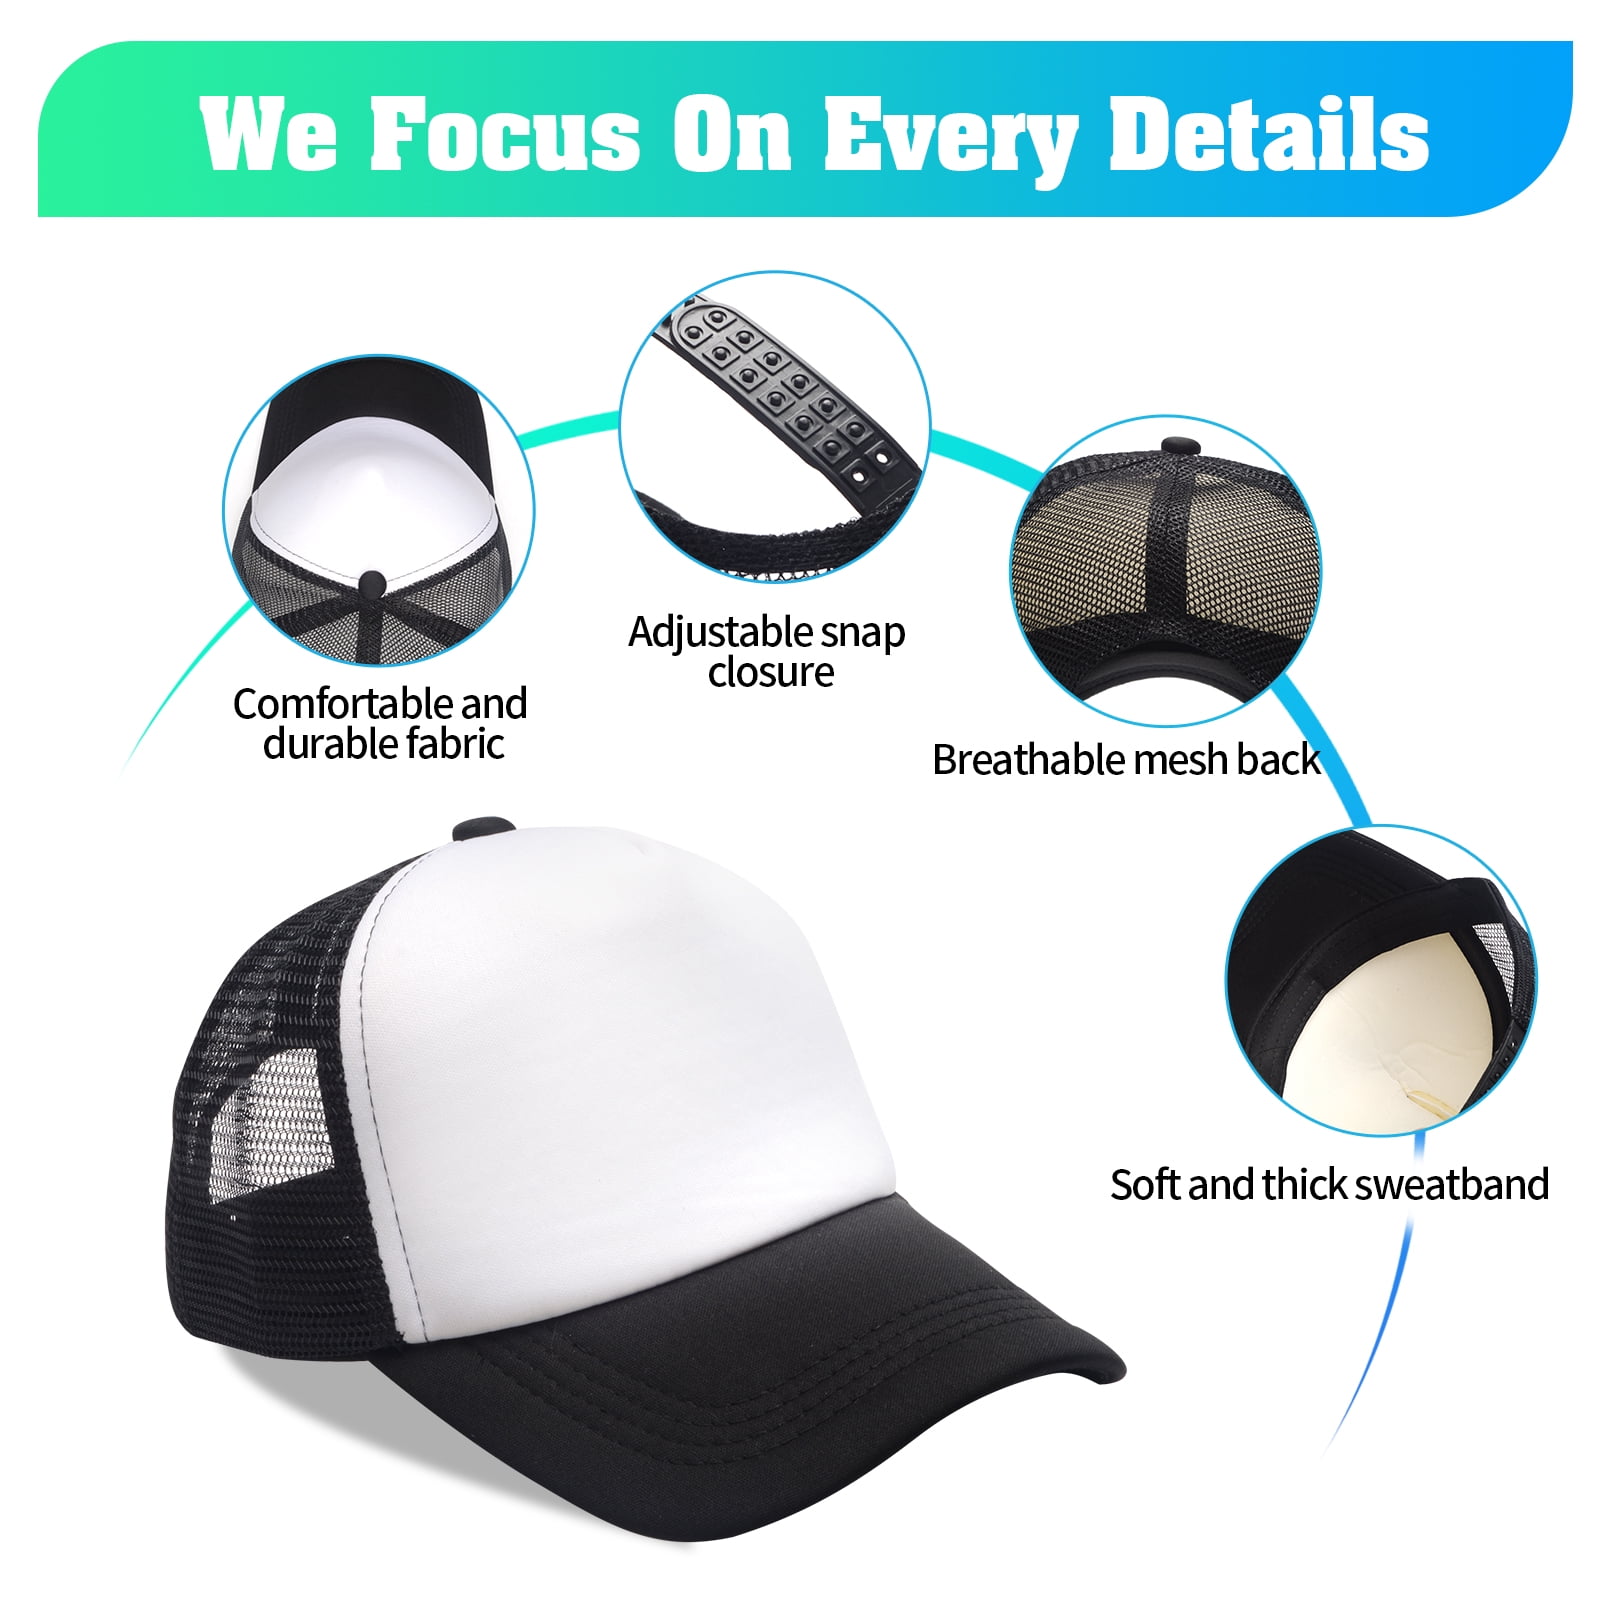 Handepo 24 Pcs Trucker Hat for Kids Summer Polyester Mesh Cap Adjustable  Sublimation Blank Hats Baseball Caps for Outdoor